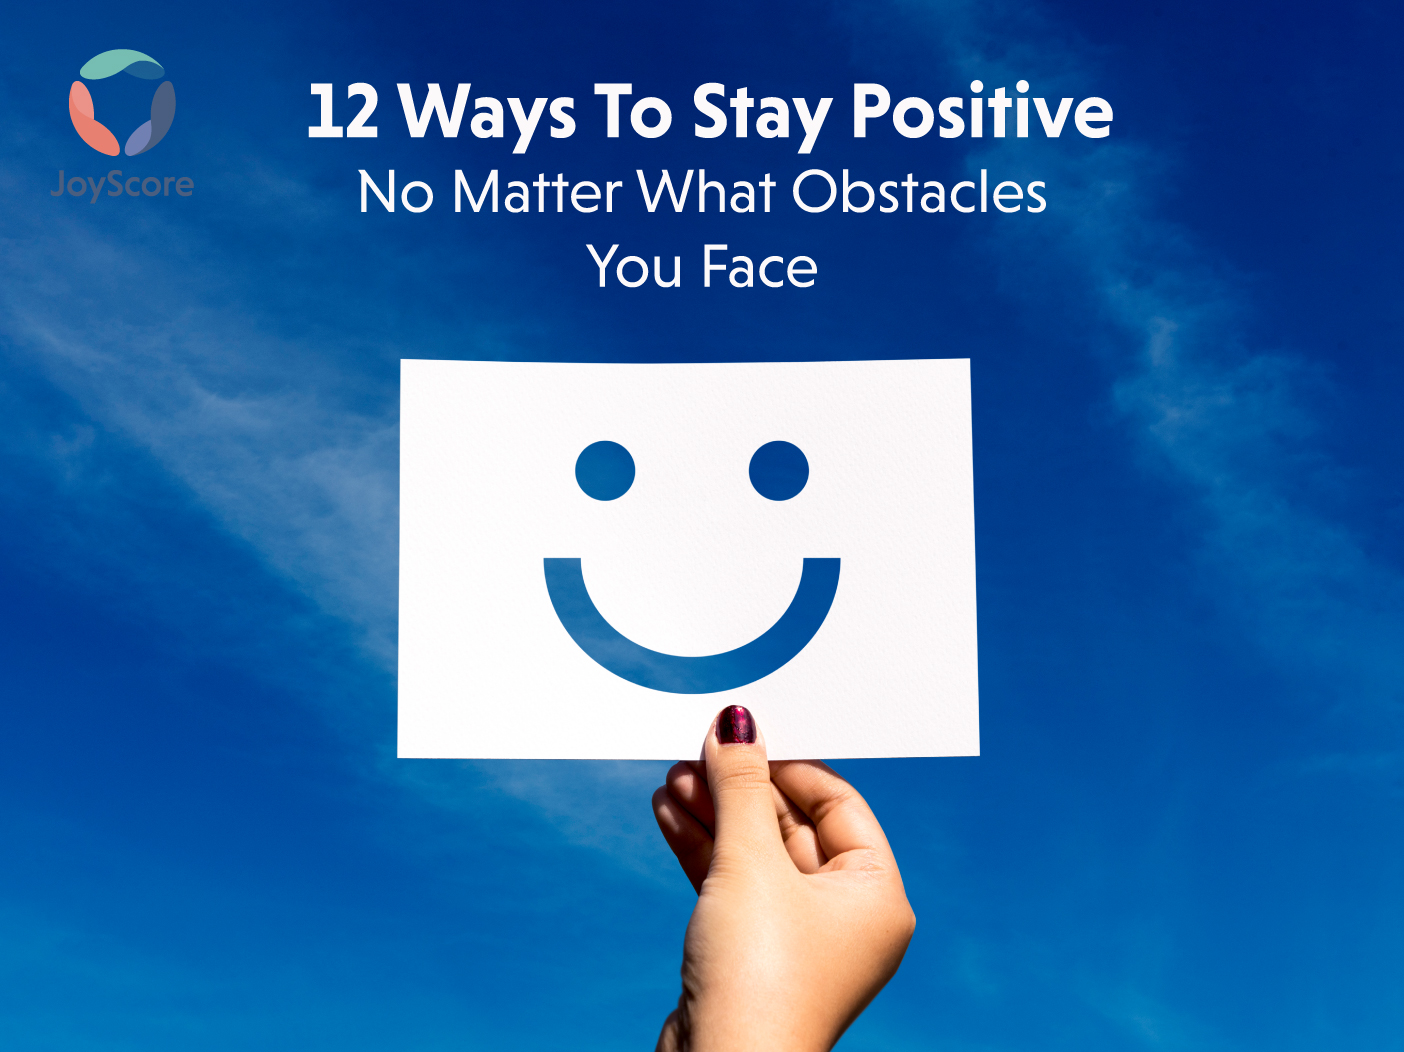 12 Ways to Stay Positive No Matter What Adversity Comes Your Way